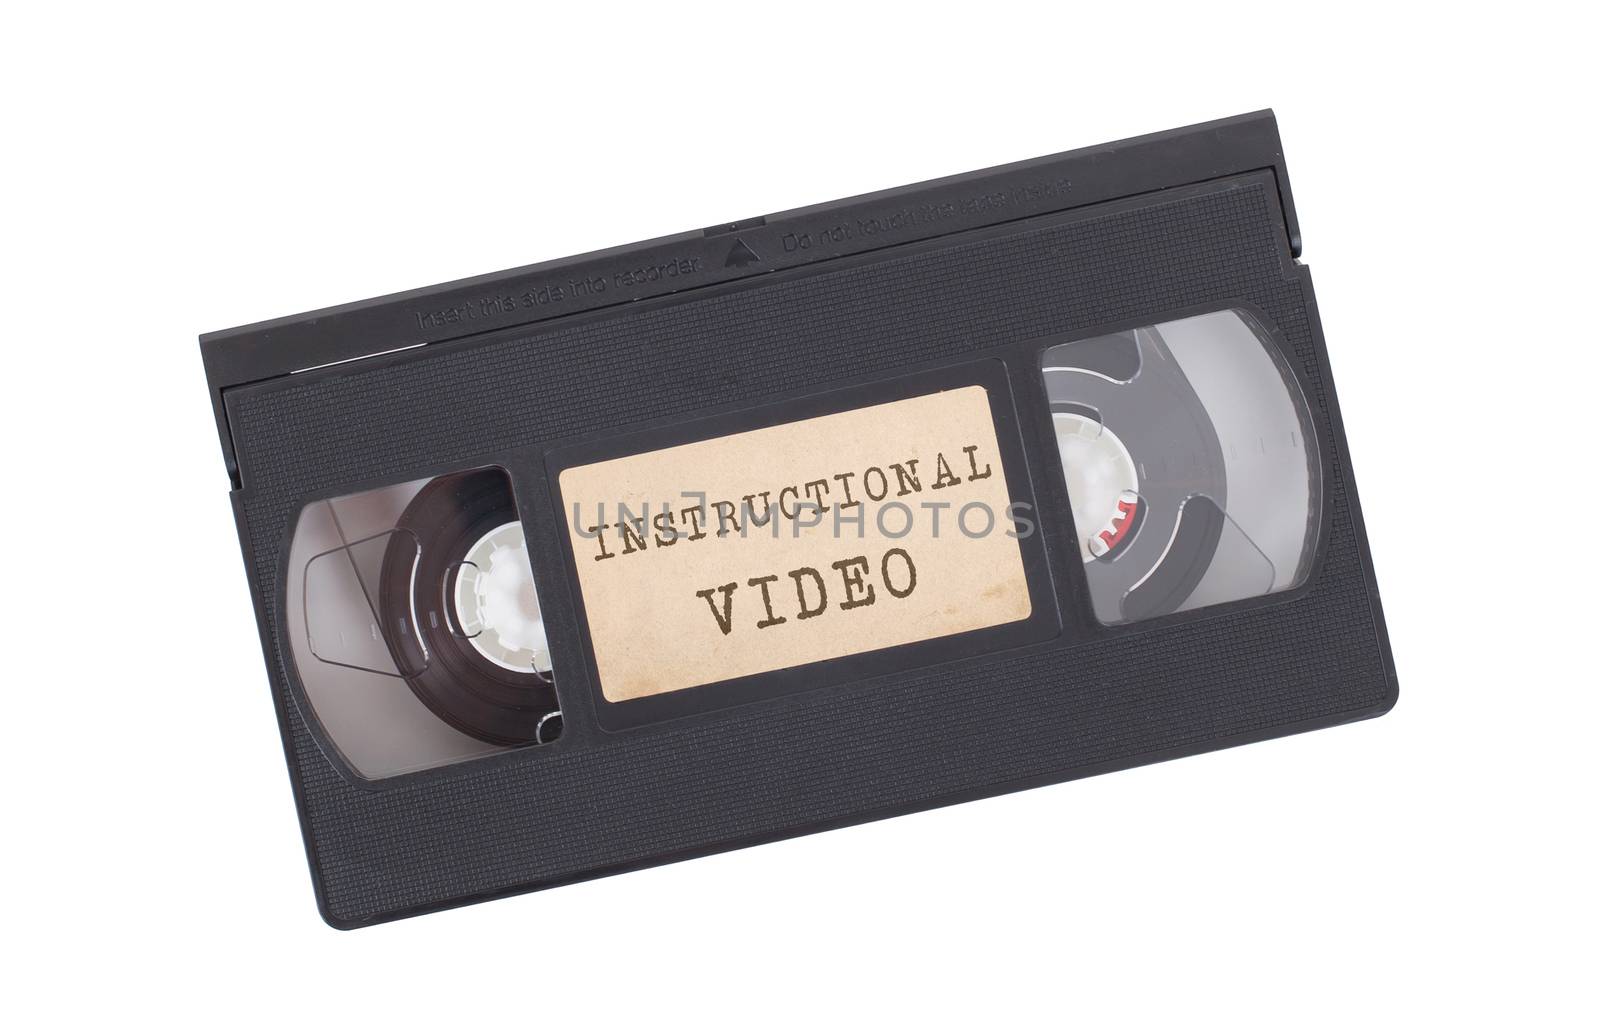 Retro videotape isolated on a white background - Instructional video